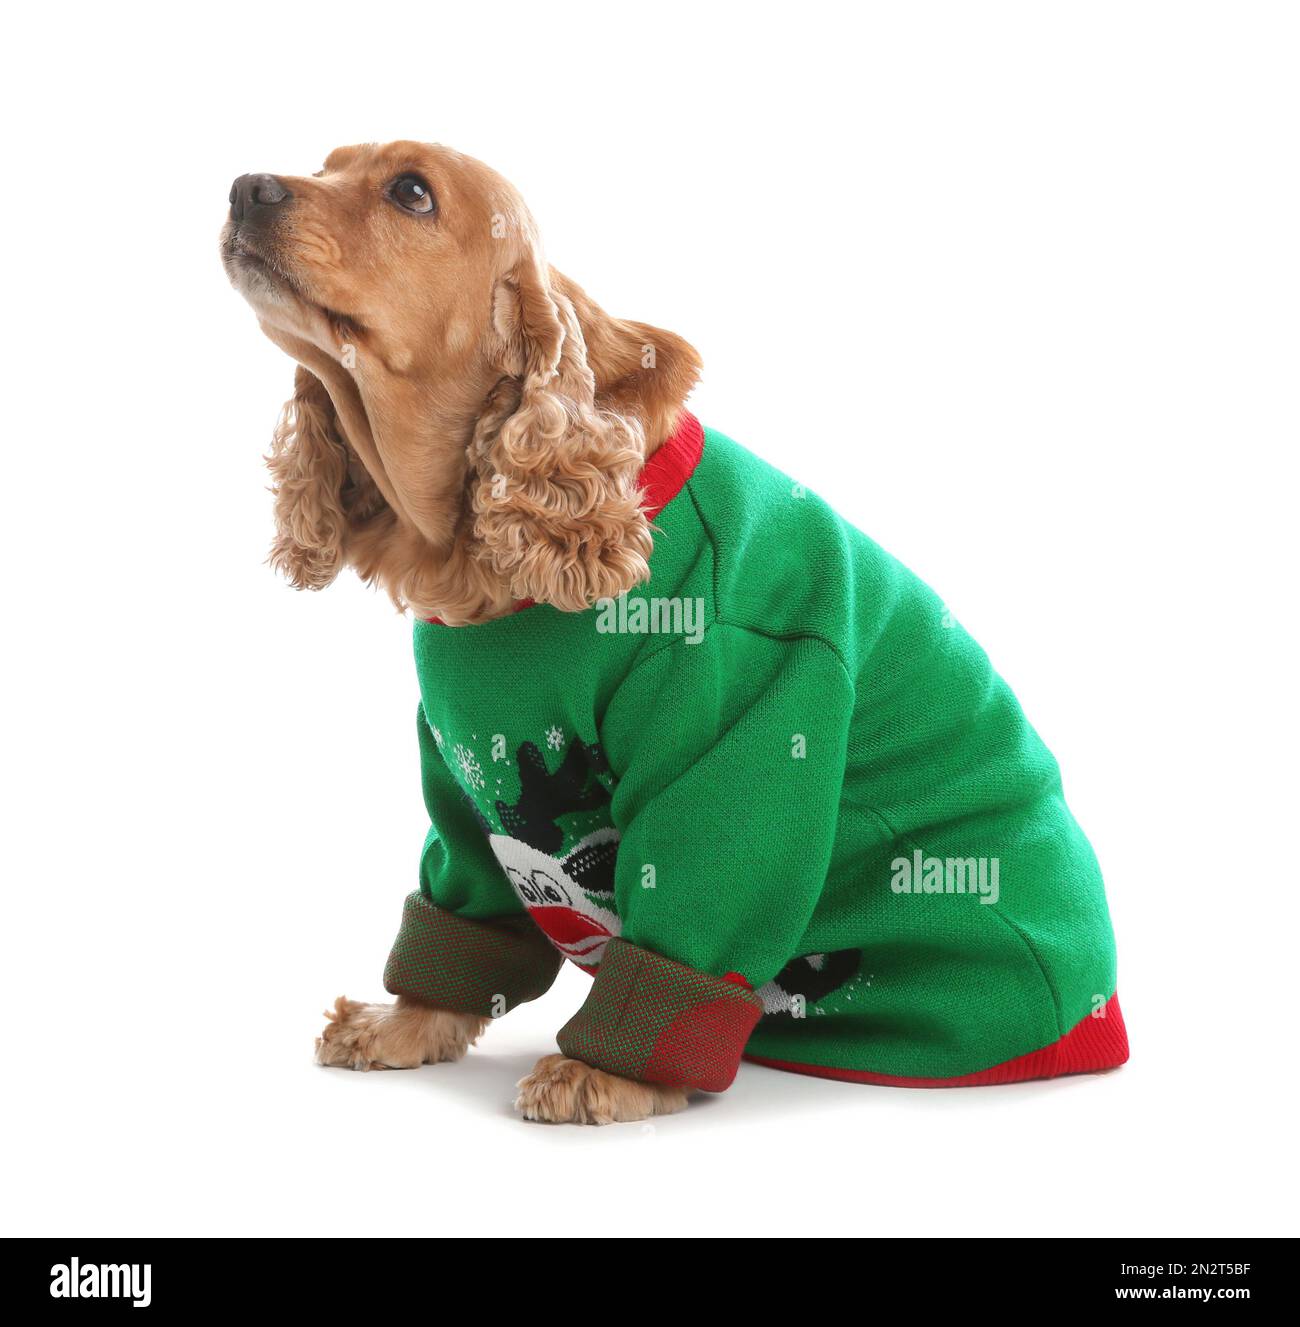 Adorable Cocker Spaniel in Christmas sweater on white background Stock Photo